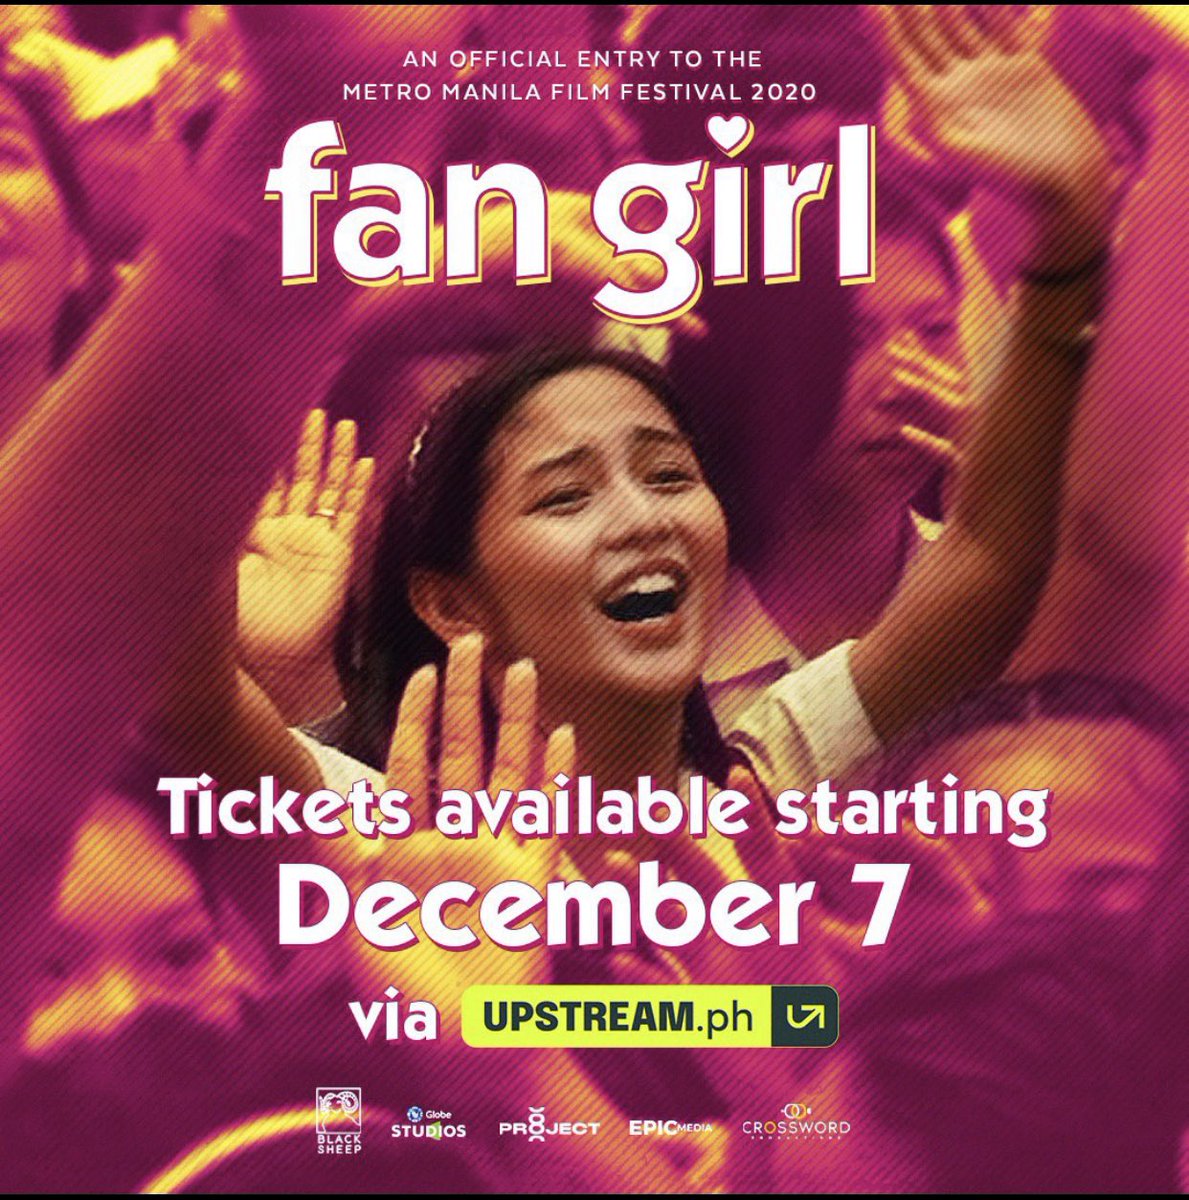 Tickets to Fan Girl go up for sale on December 7, 2020! Mark your calendars, get your GMovies account ready, and flex on your friends by getting your ticket in advance! 
Fan Girl is an official entry to the MMFF 2020, happening this December 25 - January 7, 2021. #MMFFonUPSTREAM